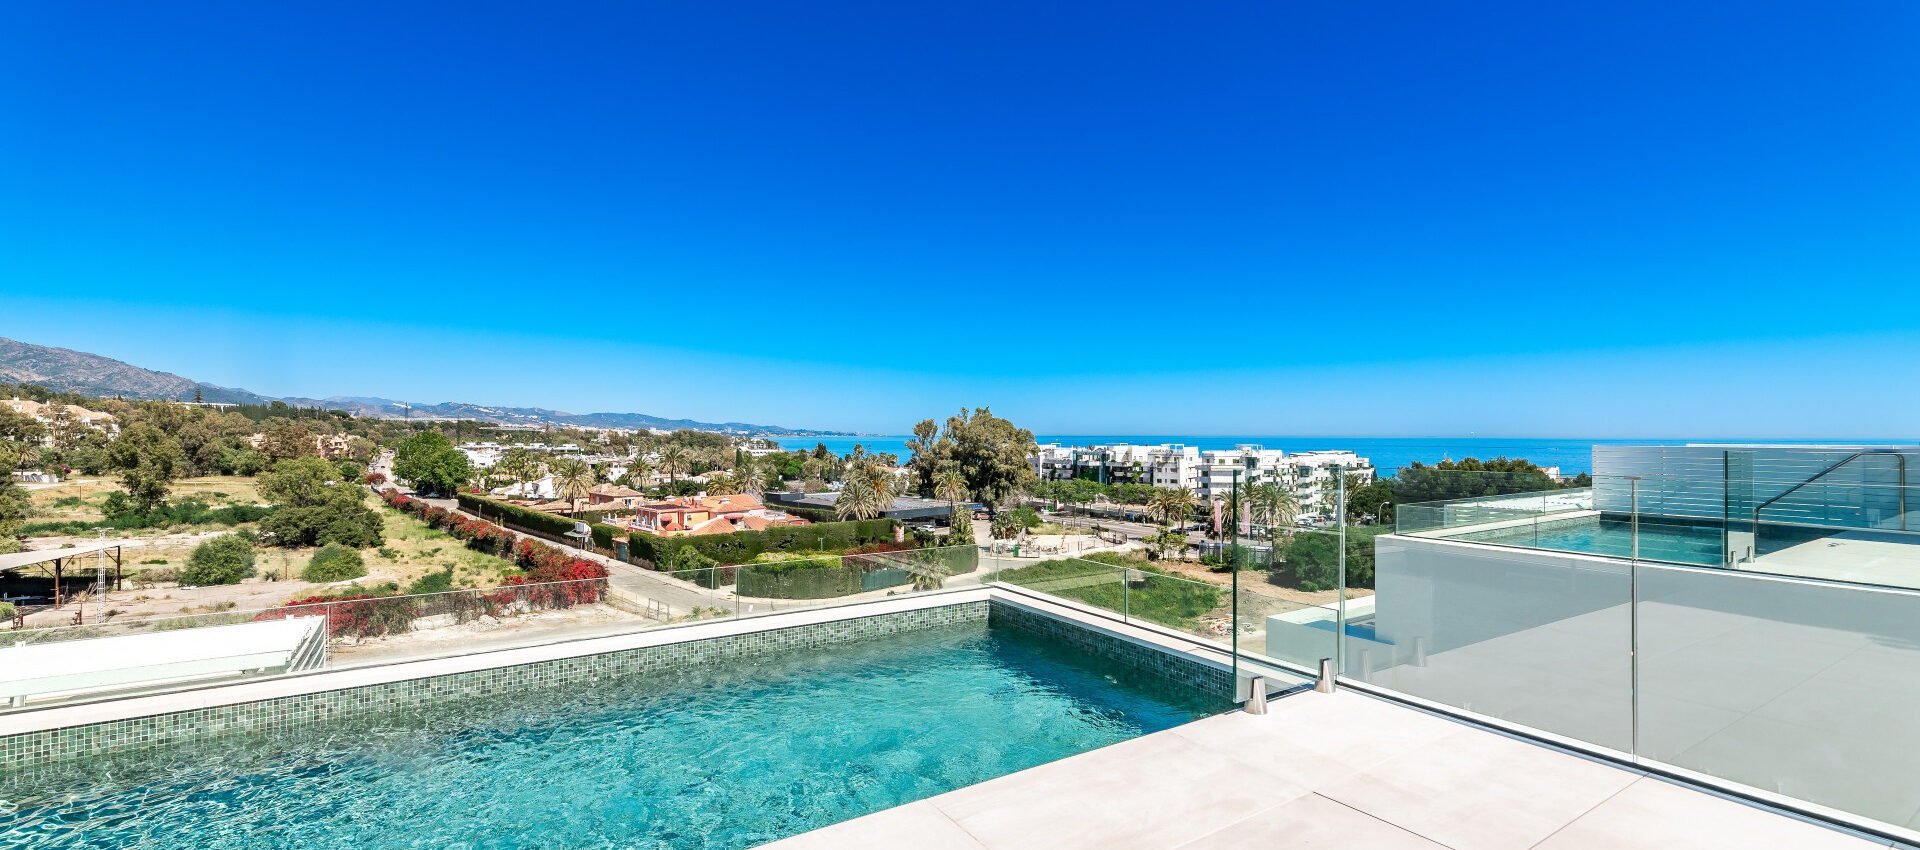 Luxury duplex penthouse in the heart of Marbella’s Golden Mile